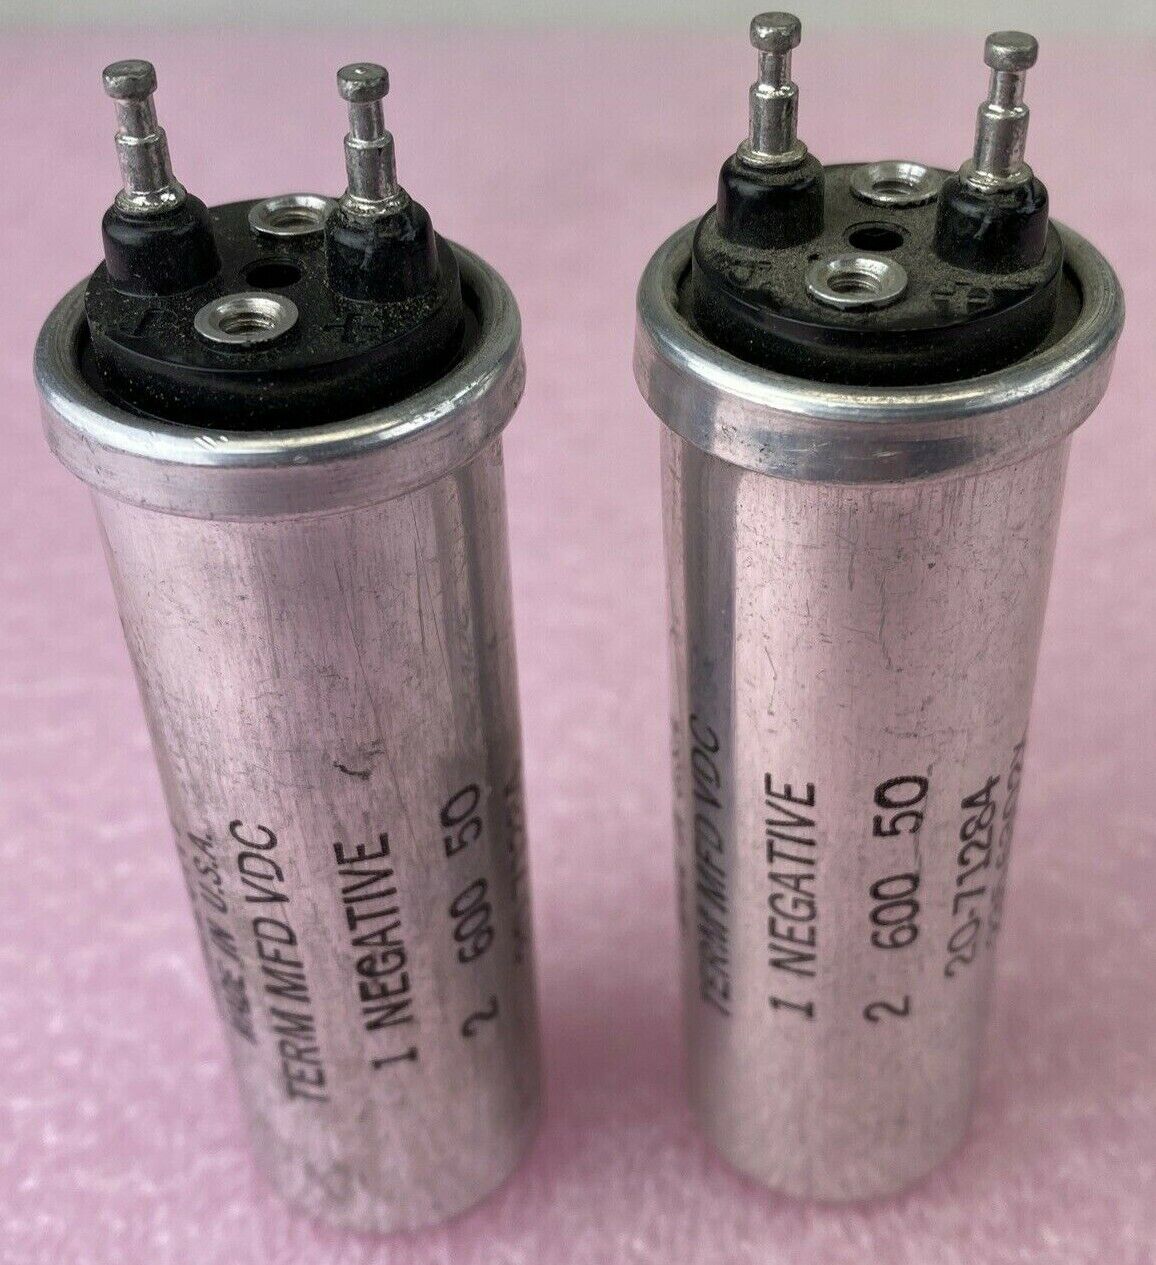 Lot of 2 Mallory 20-71284 600MFD 50VDC electrolytic capacitor 2356302X